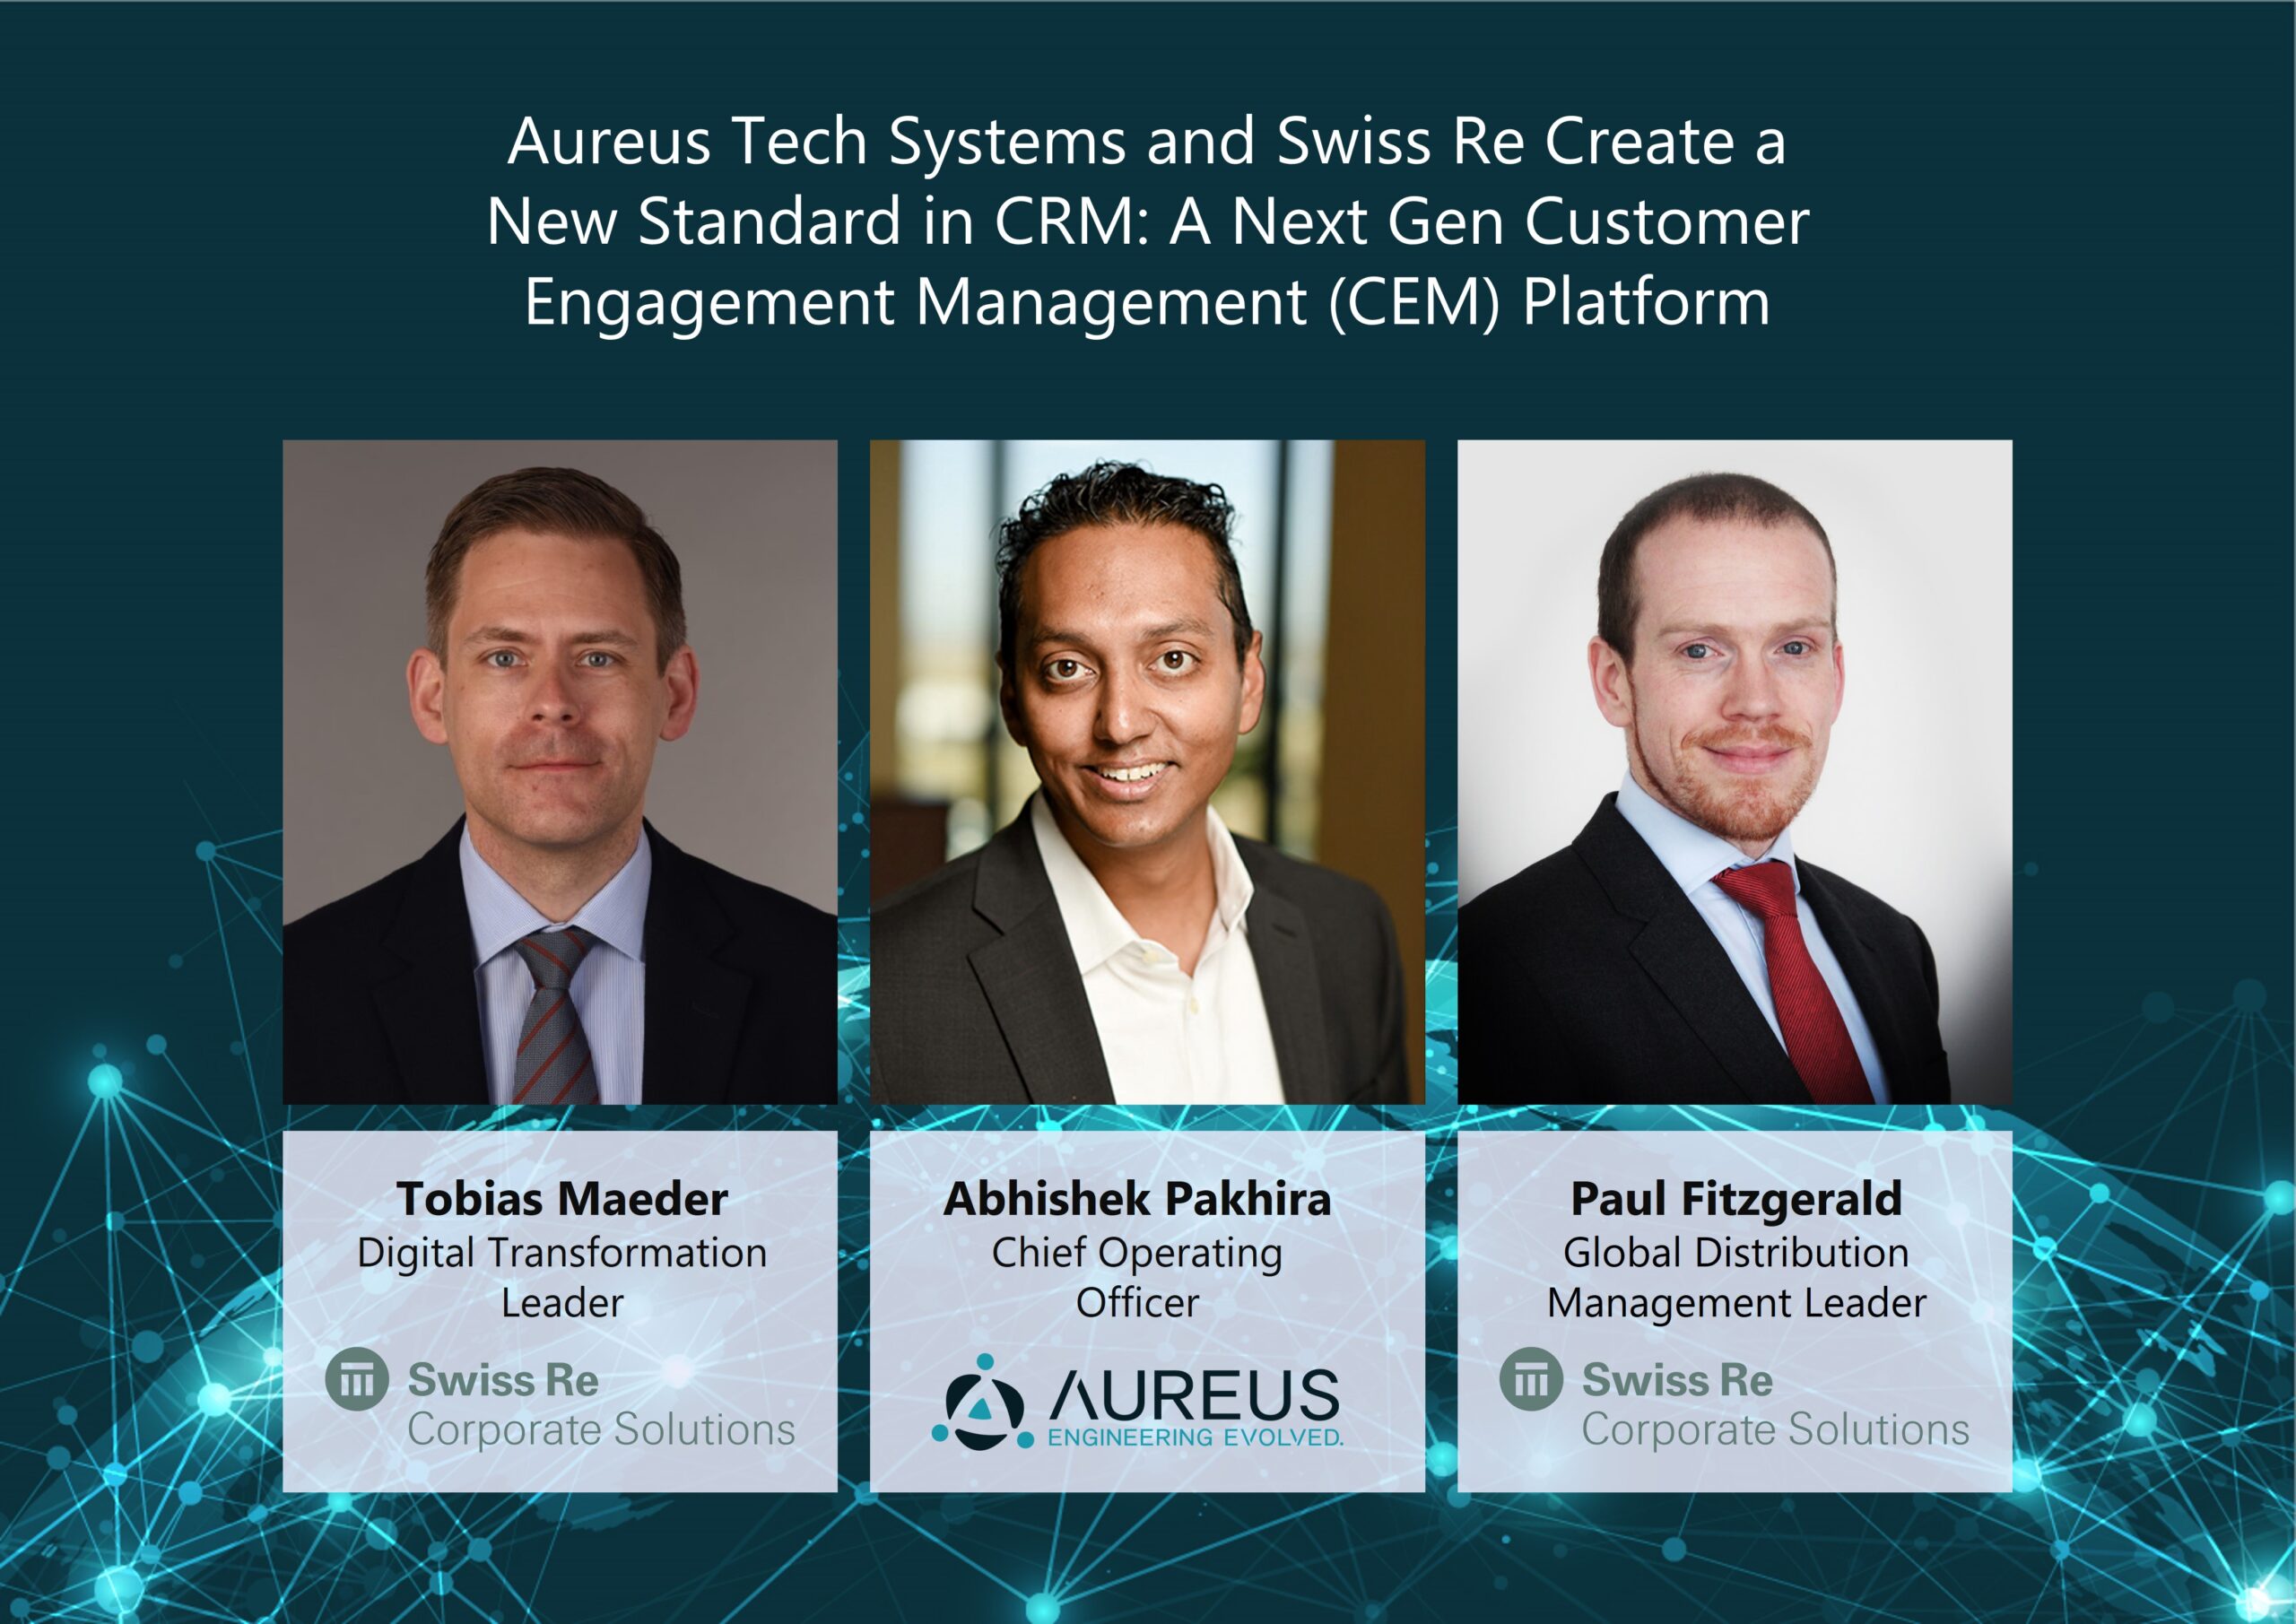 You are currently viewing “Aureus Tech Systems and Swiss Re Transform Conventional CRM into a 360° Next Gen Customer Engagement Management Solution using Microsoft Azure Cloud and AI”